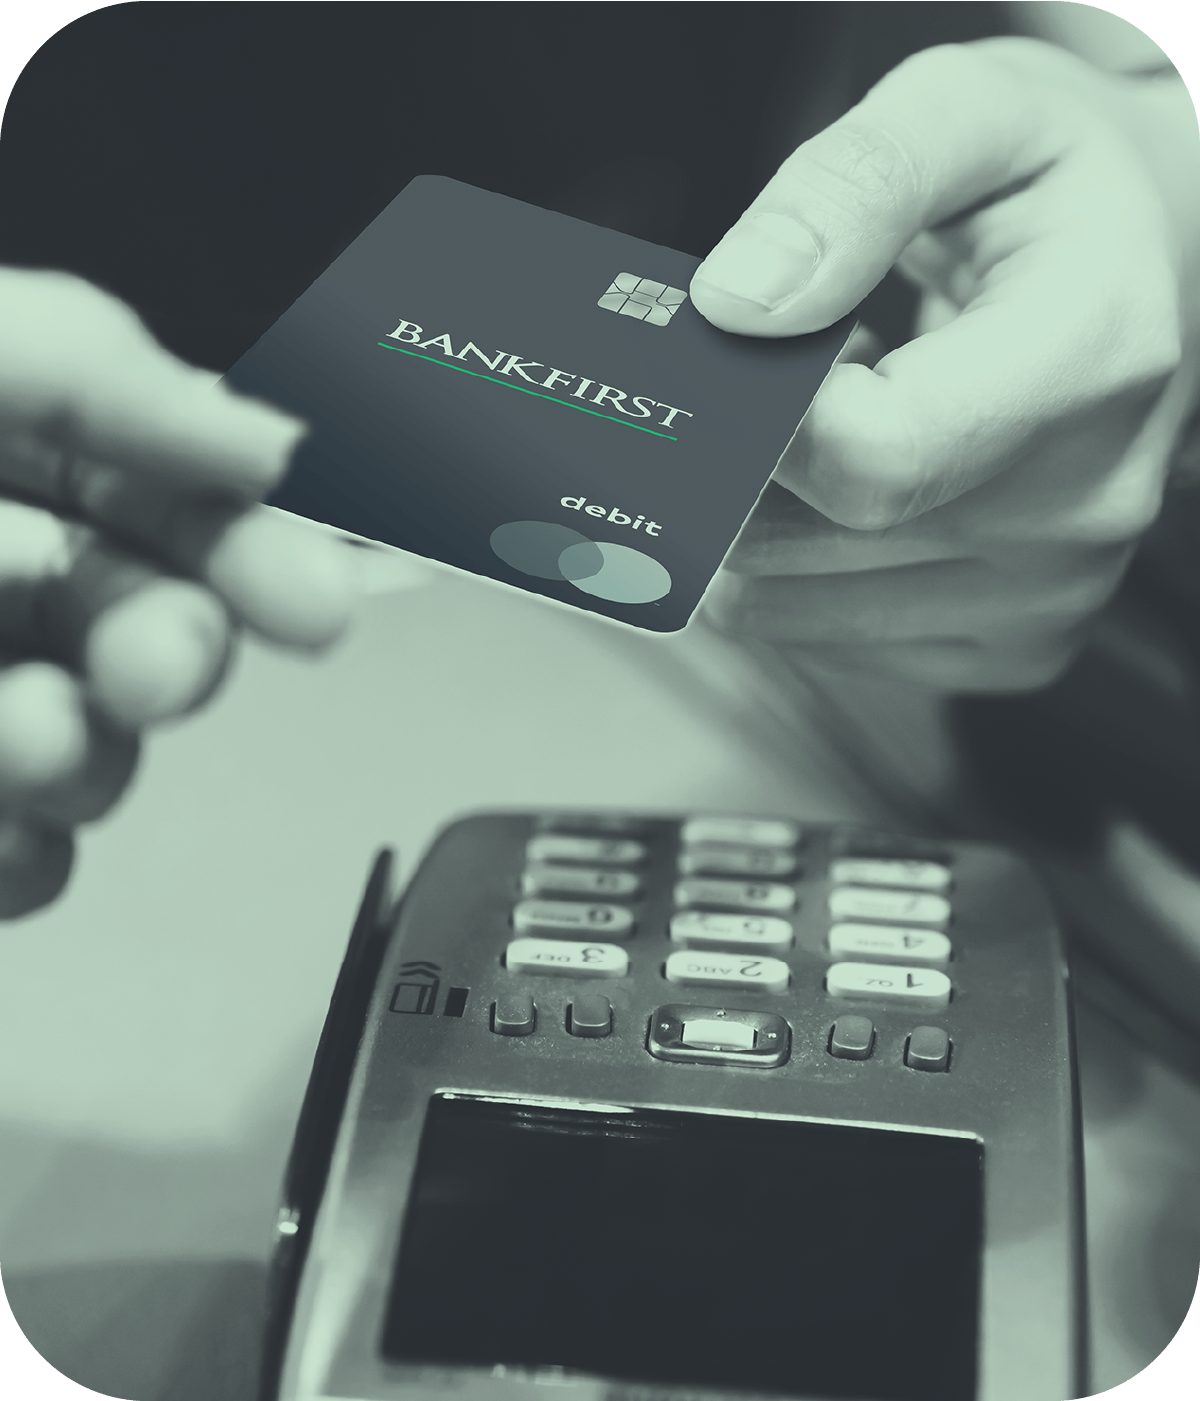 Hand holding over BankFirst Debit Card with a card processor nearby